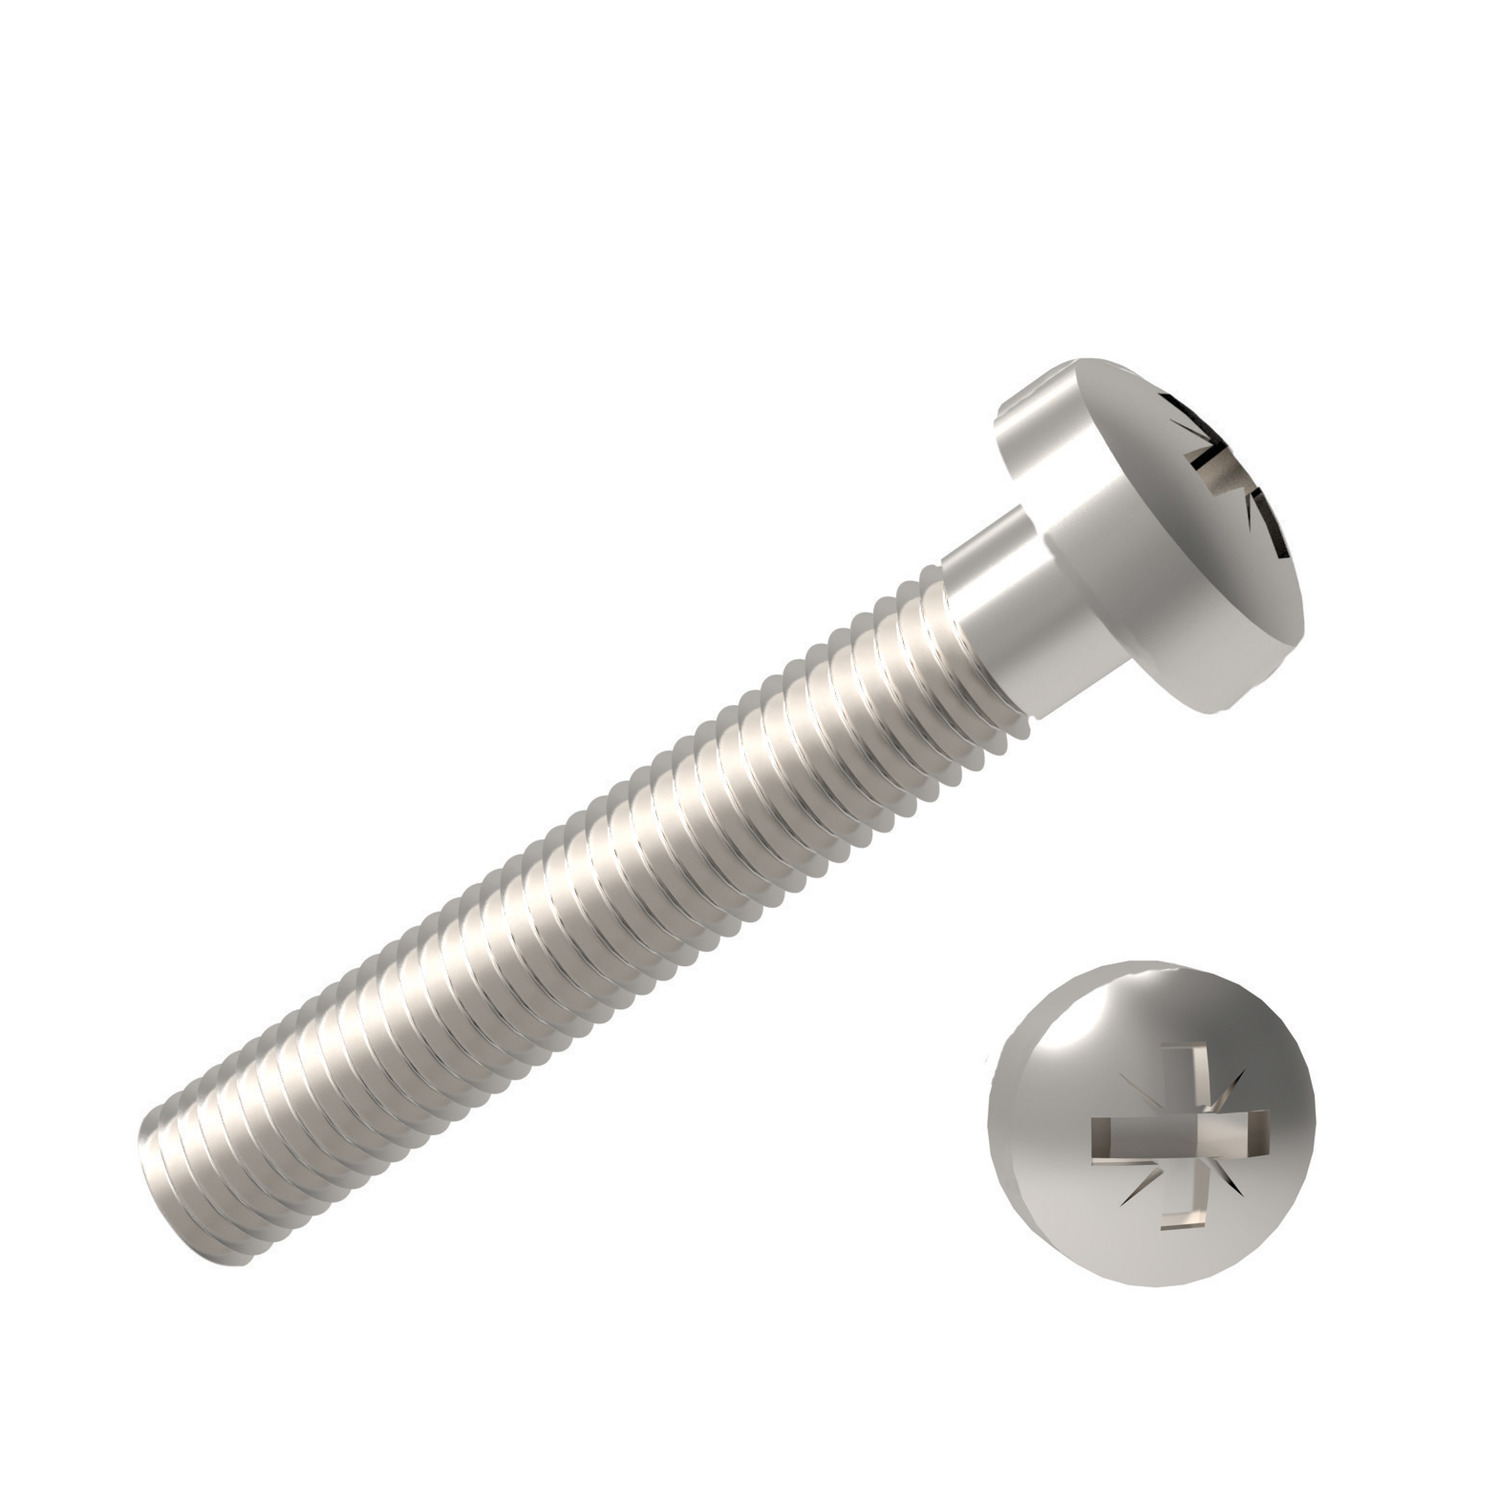 Pozi Pan Head Screws Zinc plated. To ISO 7380. Threaded within 2,5 x pitch of head.